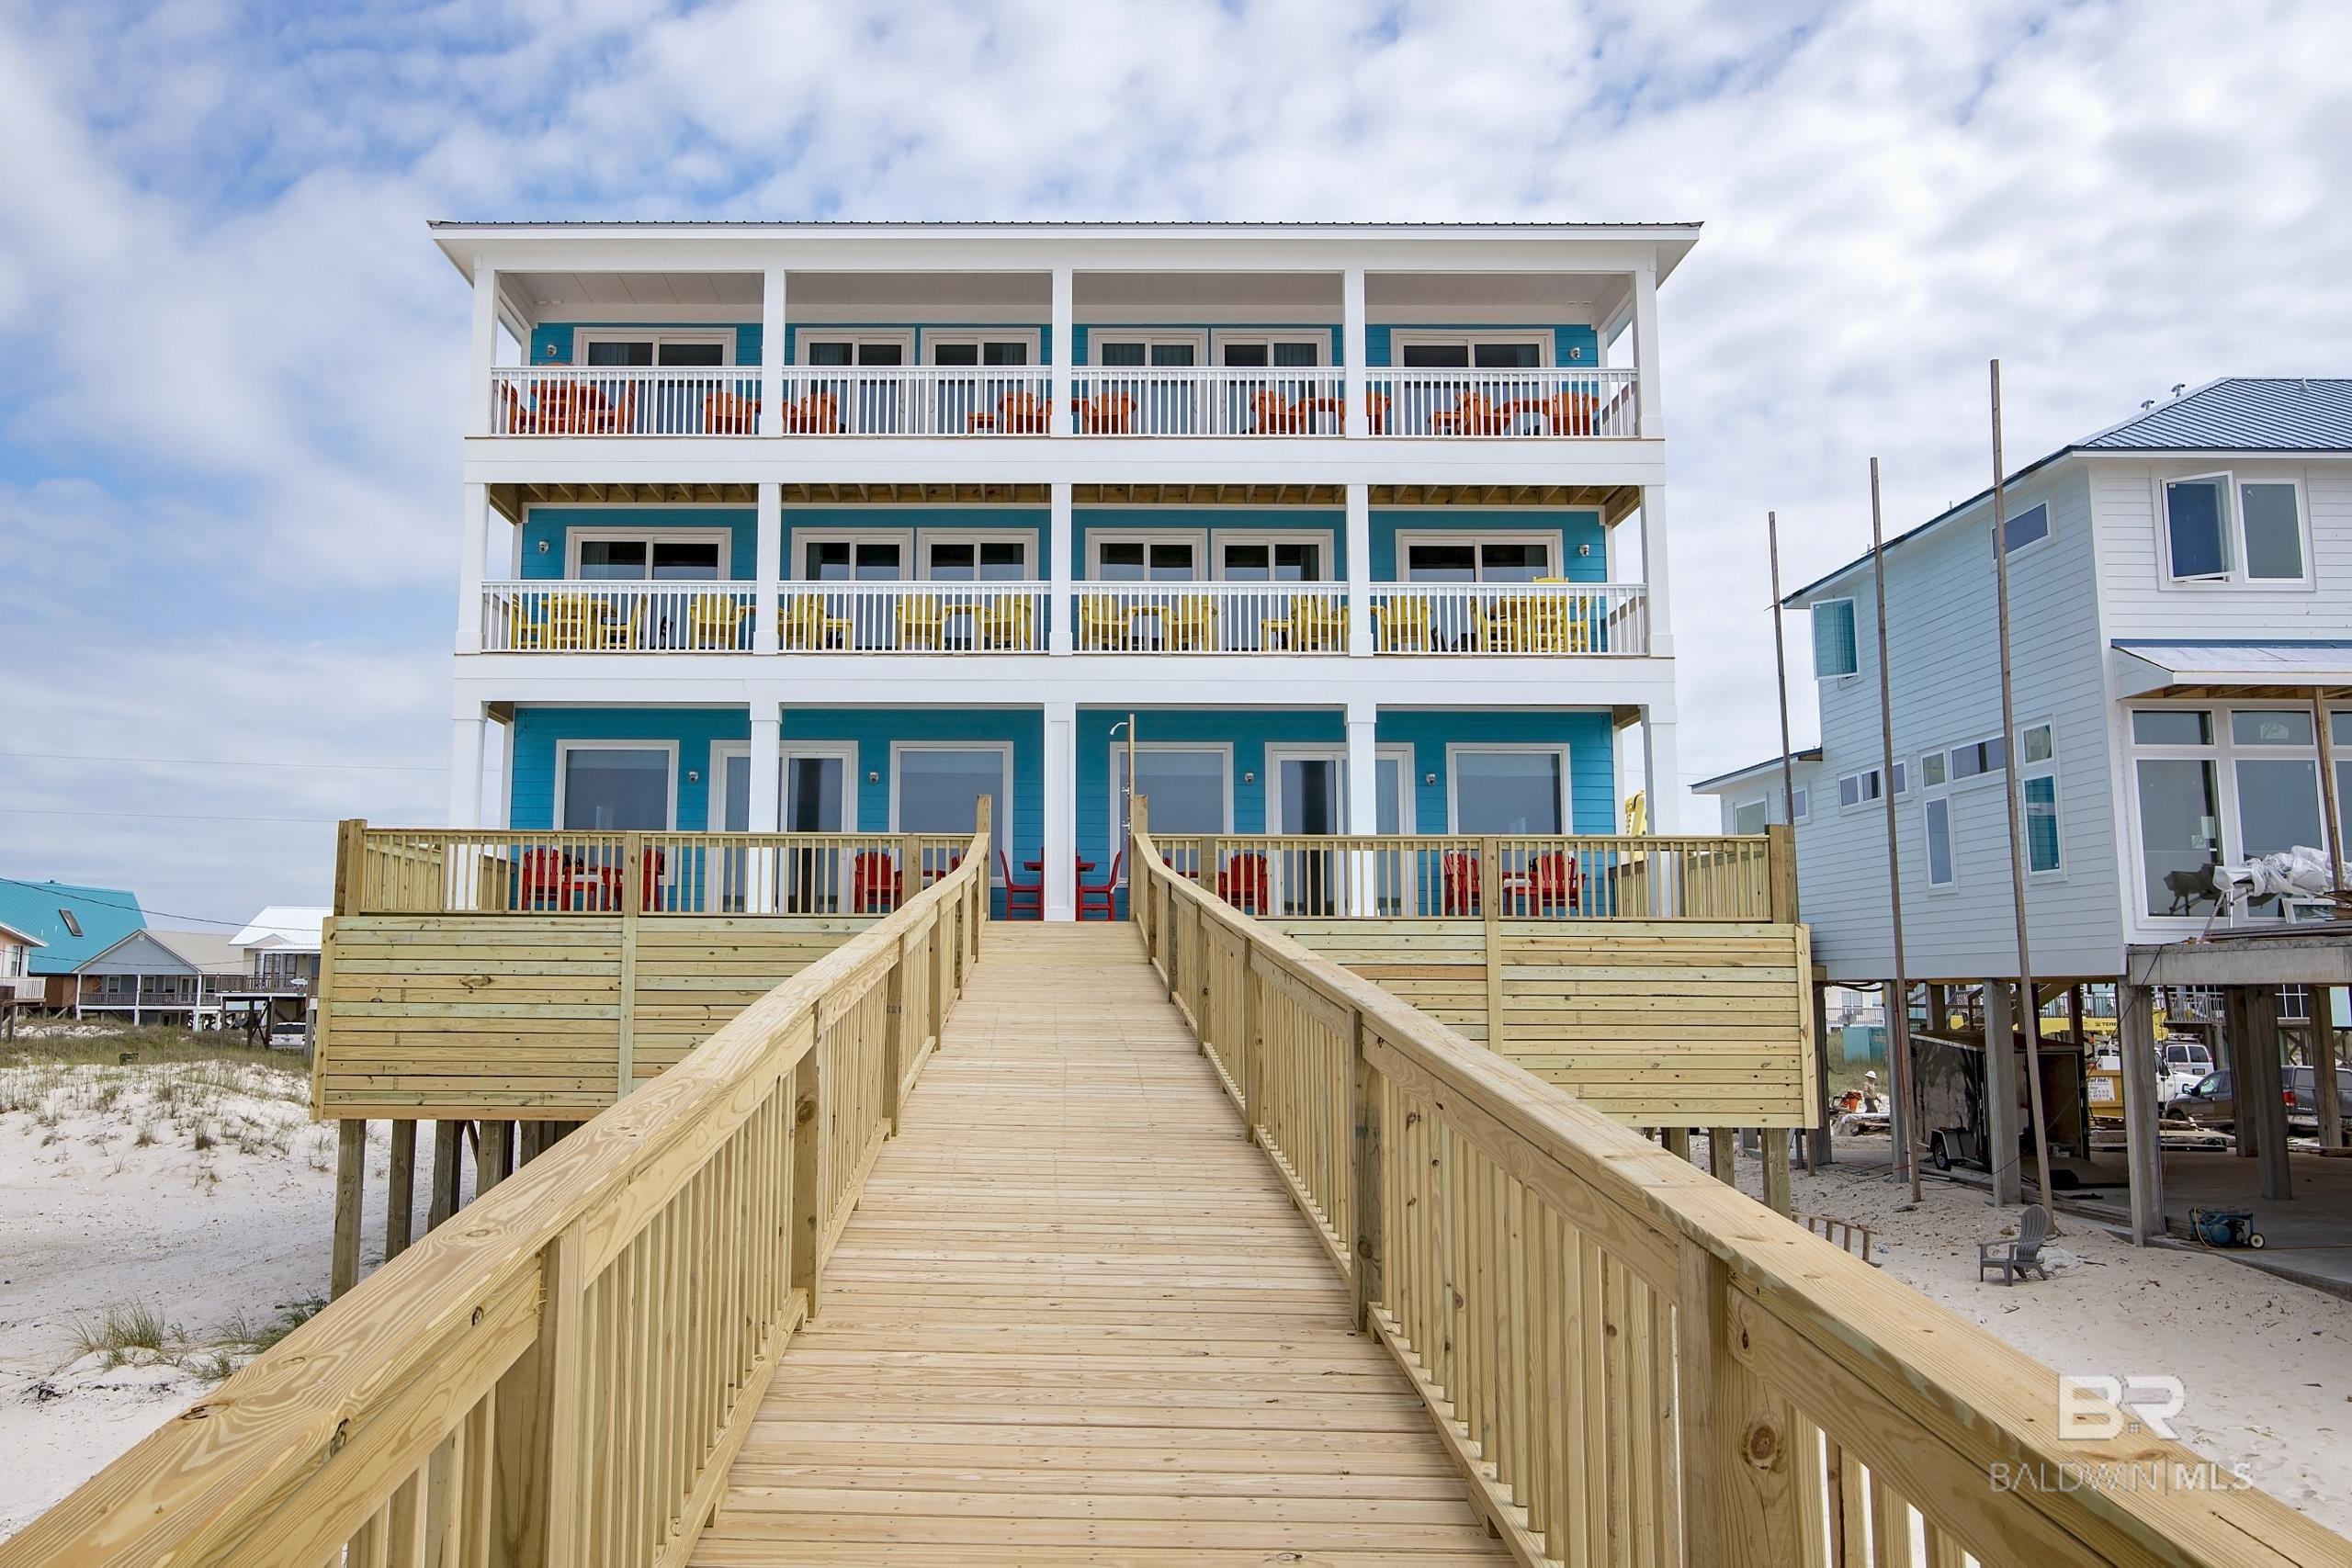 Completed in late May of 2017, Easy Breezy is ready for you and your group to come and make life long memories in! Easy Breezy is a 18 bedroom plus 4 bonus bunk rooms, 18 bath, 2 half bath house that sleeps 44. Easy Breezy is direct gulf front and offers amazing views of the white sandy beaches and crystal blue waters of the Alabama Gulf Coast. The home is 3 stories and has balconies on all 3 levels. There are 2 pools  , ample parking, Wi-Fi/Internet, Cable/Satellite, and much more. There is also an elevator that services one side. This house is a Vacation Rental on Prickett Properties Management program. The house is rented most of the time so as much advanced notice as possible please Approx. living area is 10,000 with around 1800 feet of porches and 2 pools.   Buyer to verify all dimensions and details.  Gross rentals for 2022 as of May 3, 2022 is $443,420.00 with a projected year end gross amount of $500,000 +.